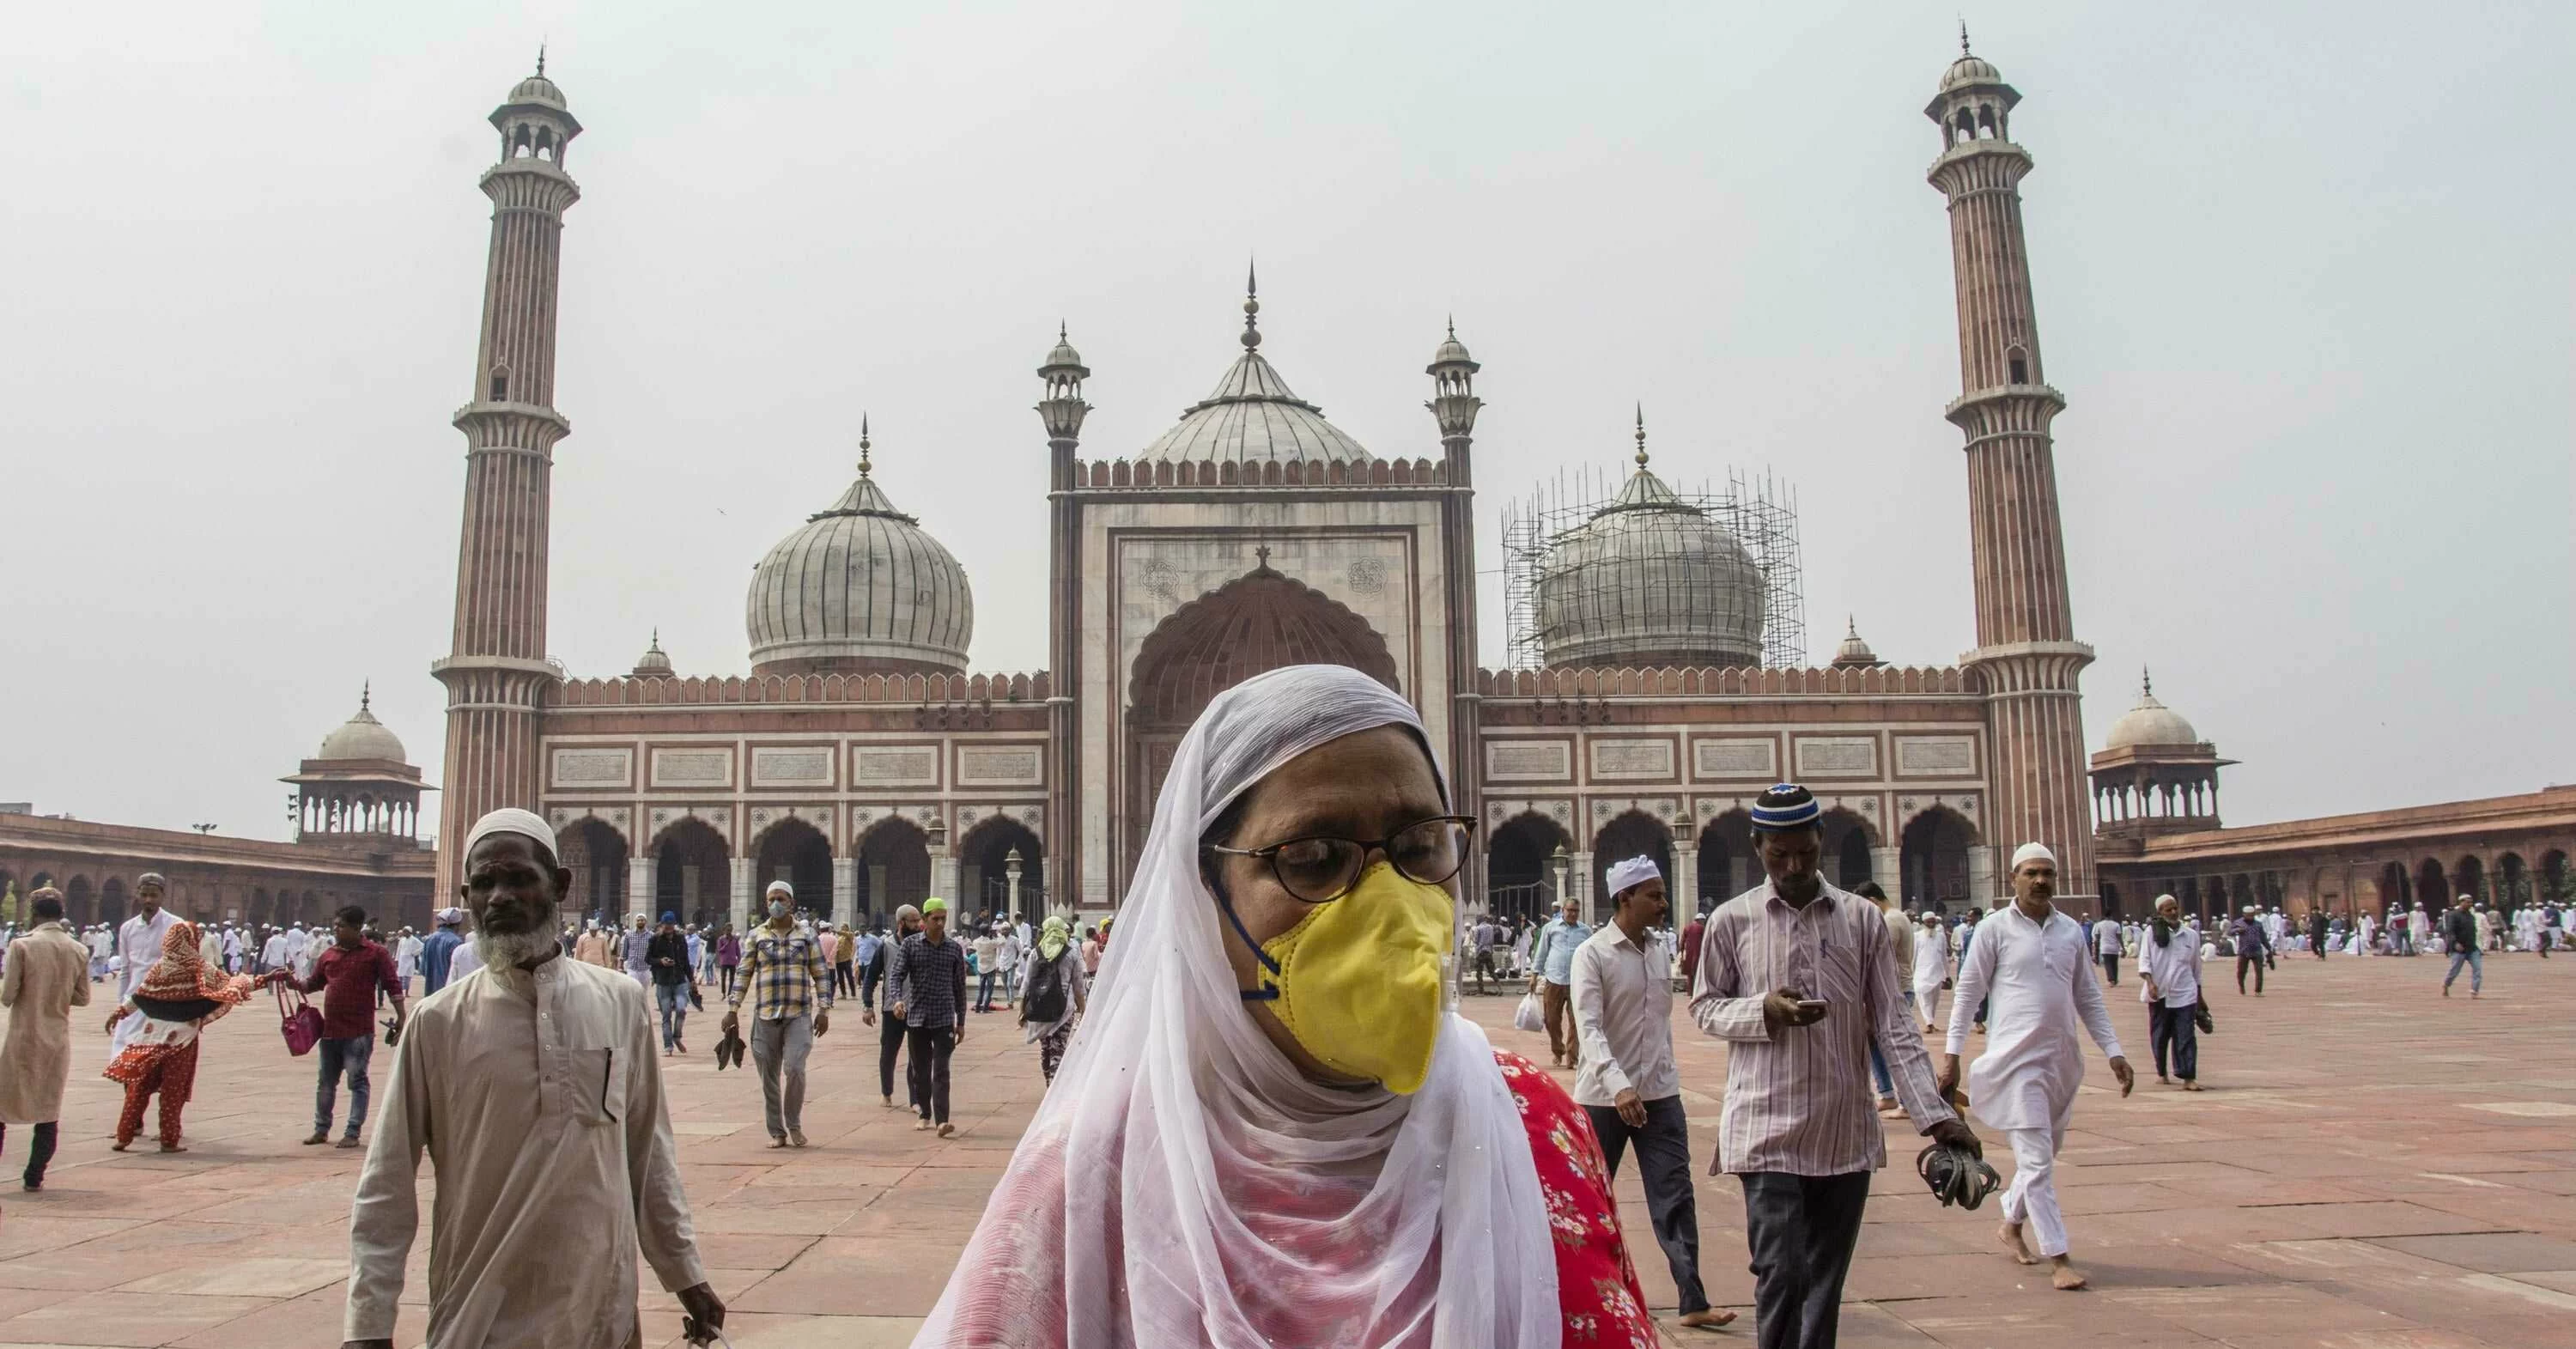 A Cluster Of Coronavirus Cases Can Be Traced Back To A Single Mosque And Now 200 Million Muslims Are Being Vilified